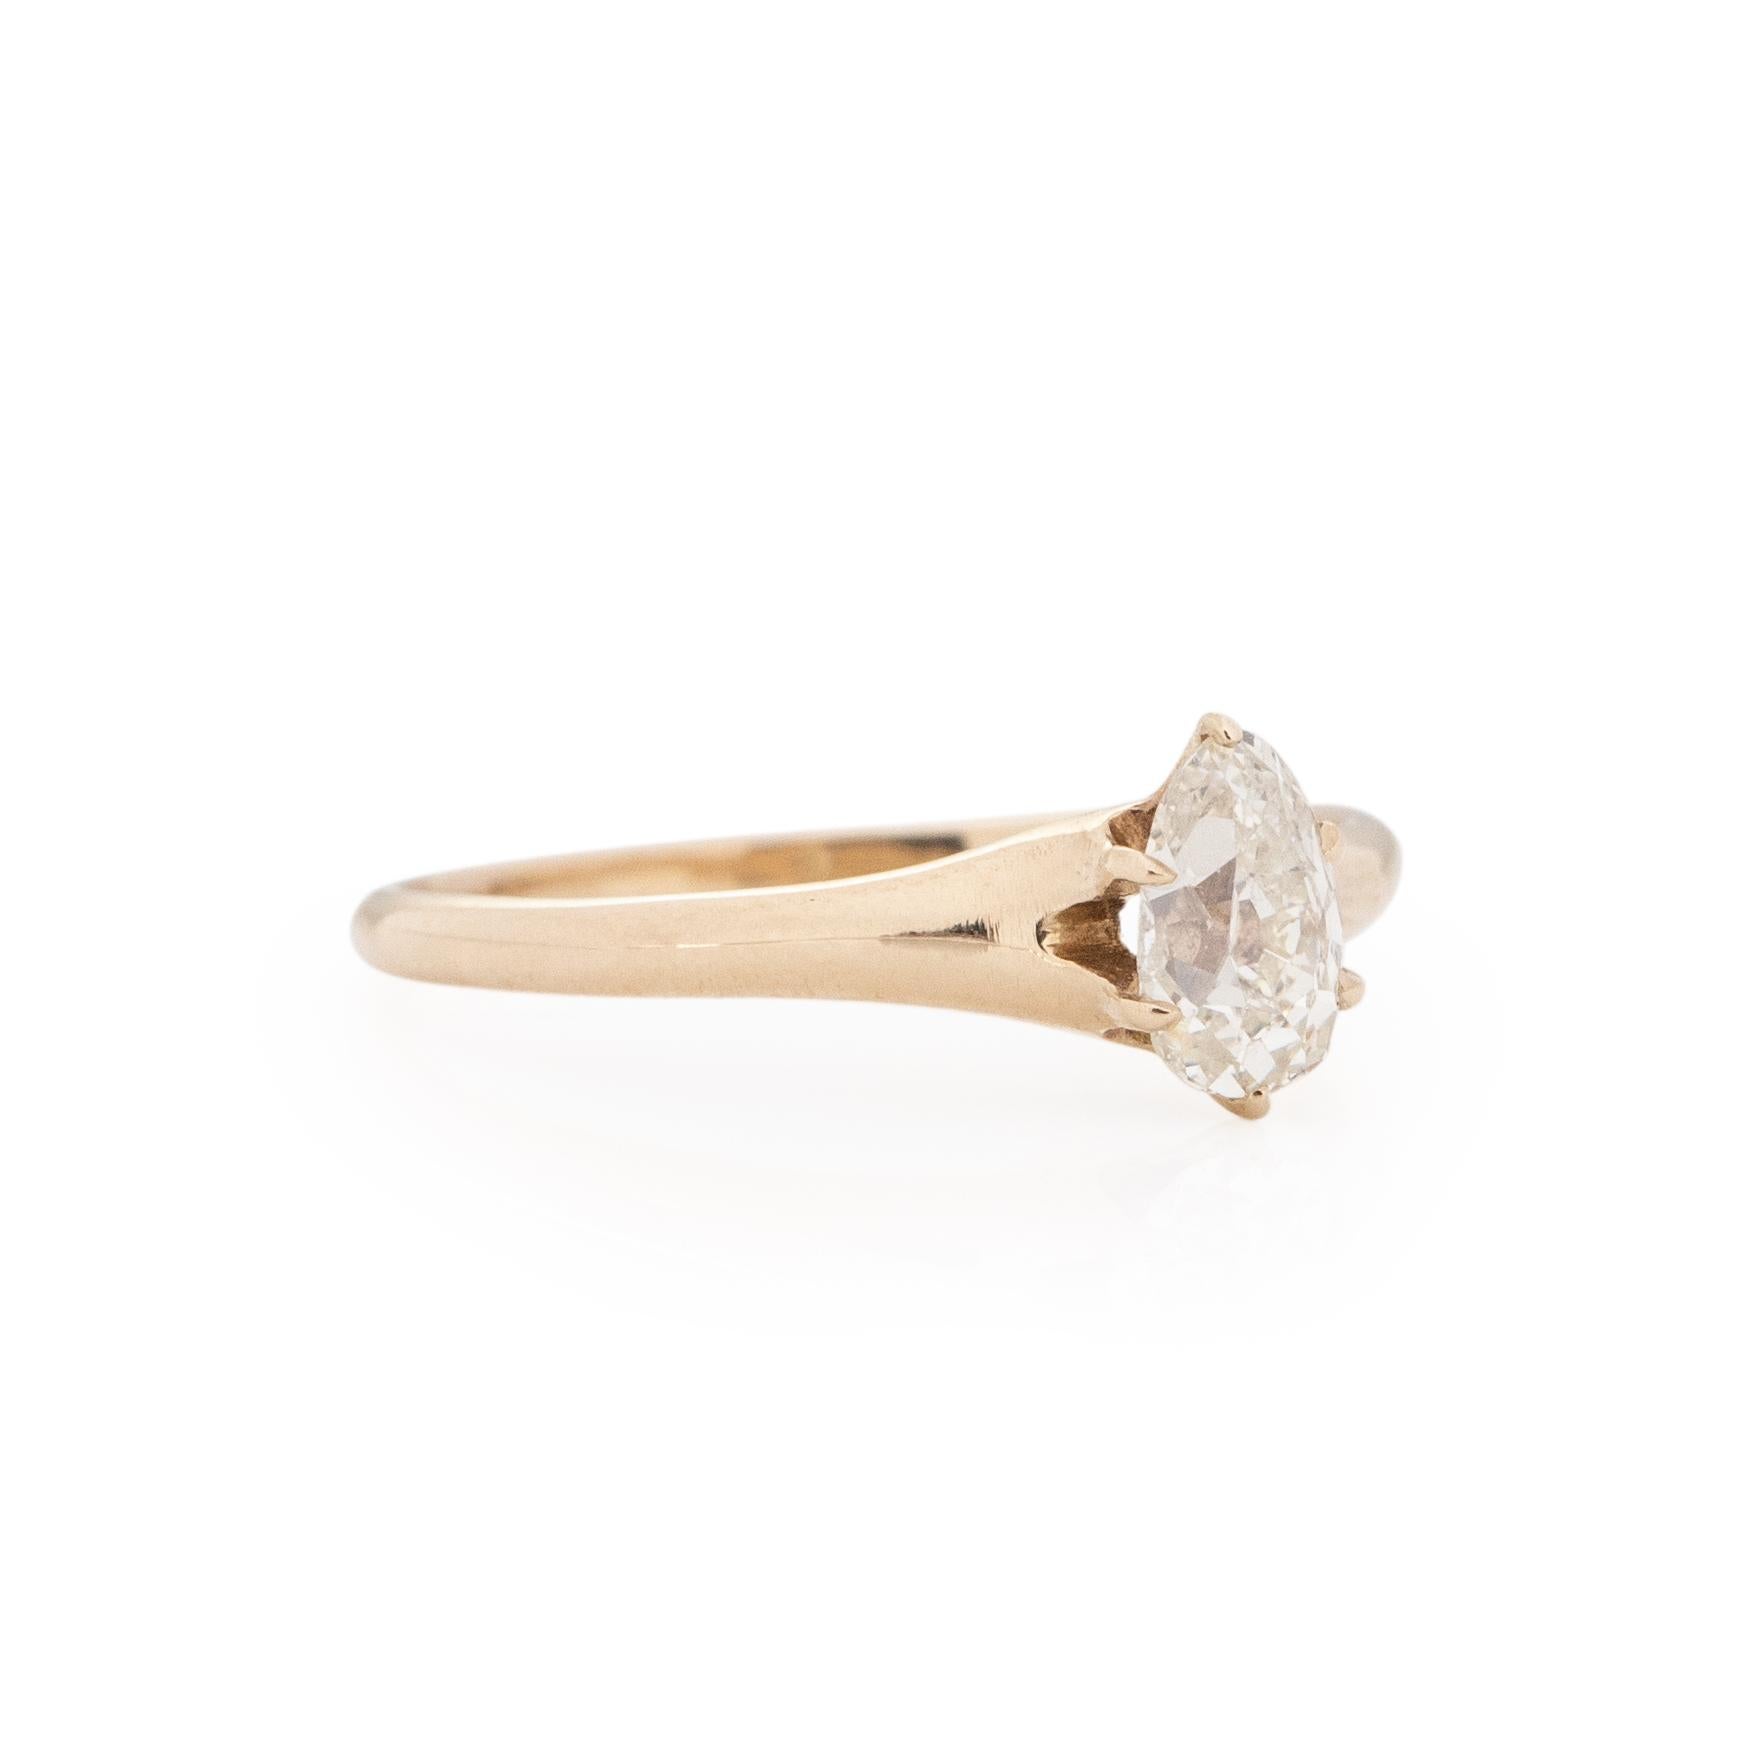 This Victorian engagement ring is beautifully unique. The prong setting and 14K yellow gold is classic, the pear shape is what makes this piece one of a kind. A true beauty this ring can be pared with any vintage wedding band, help pop the question